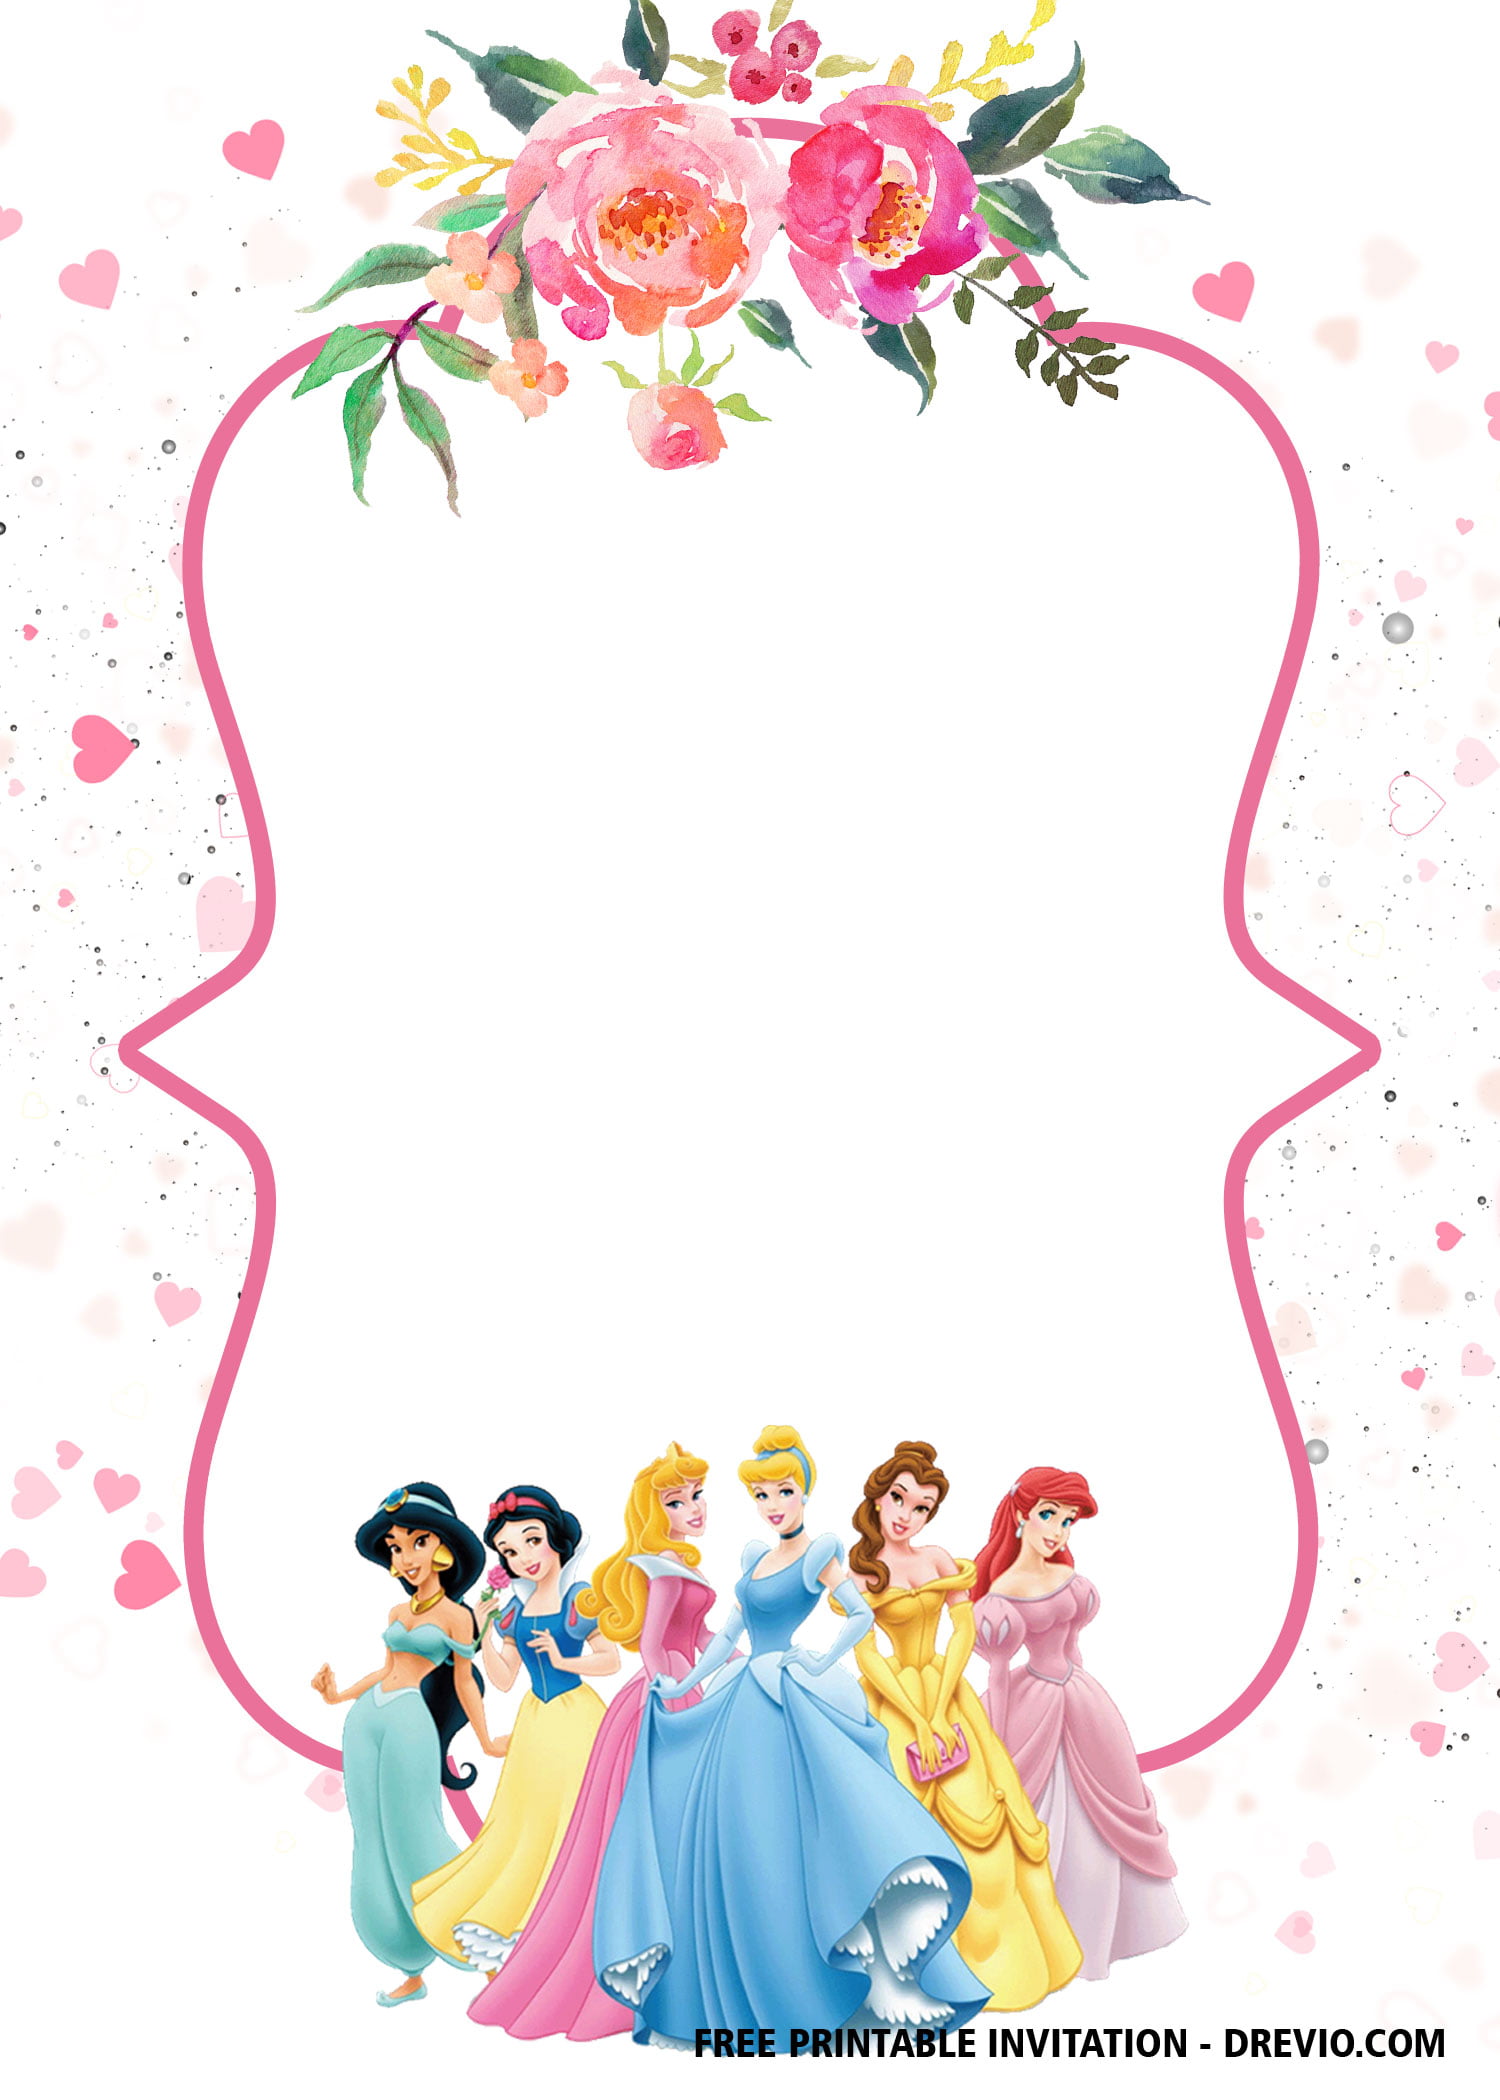 FREE Disney Princess Invitation Template For Your Little Girl s 